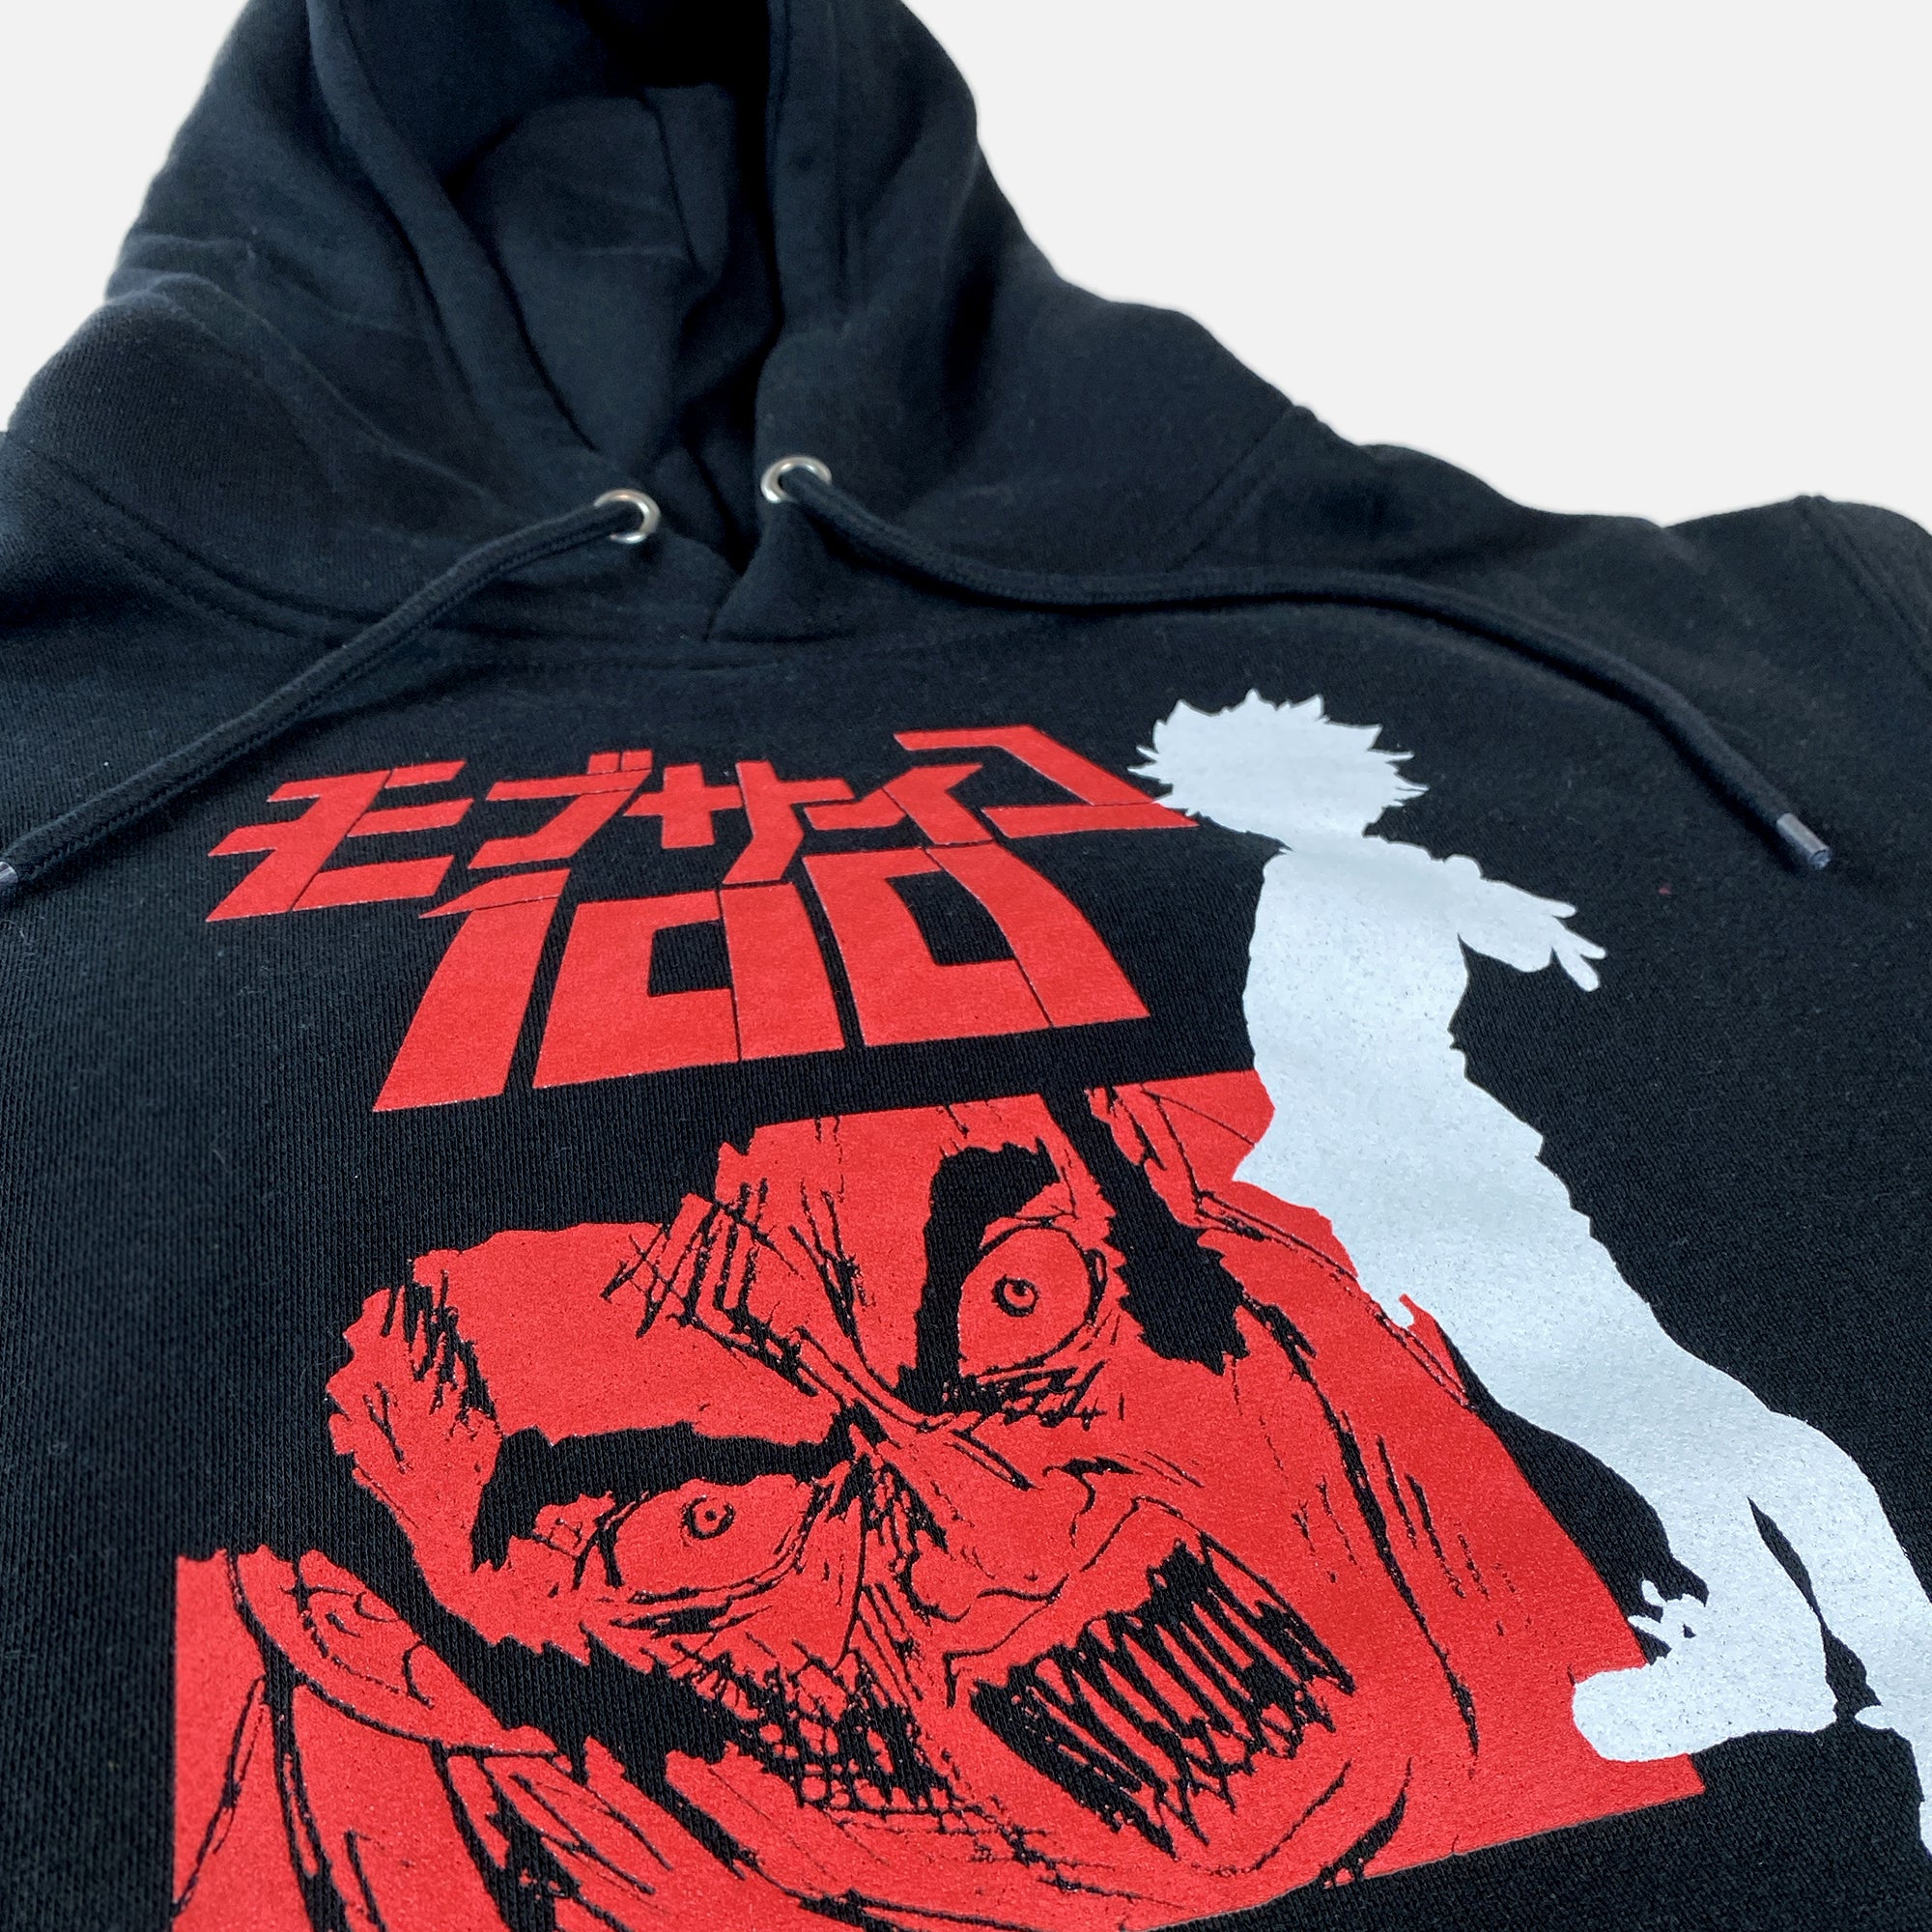 Mob Psycho - Mob Silhouette Hoodie - Crunchyroll Exclusive! image count 1